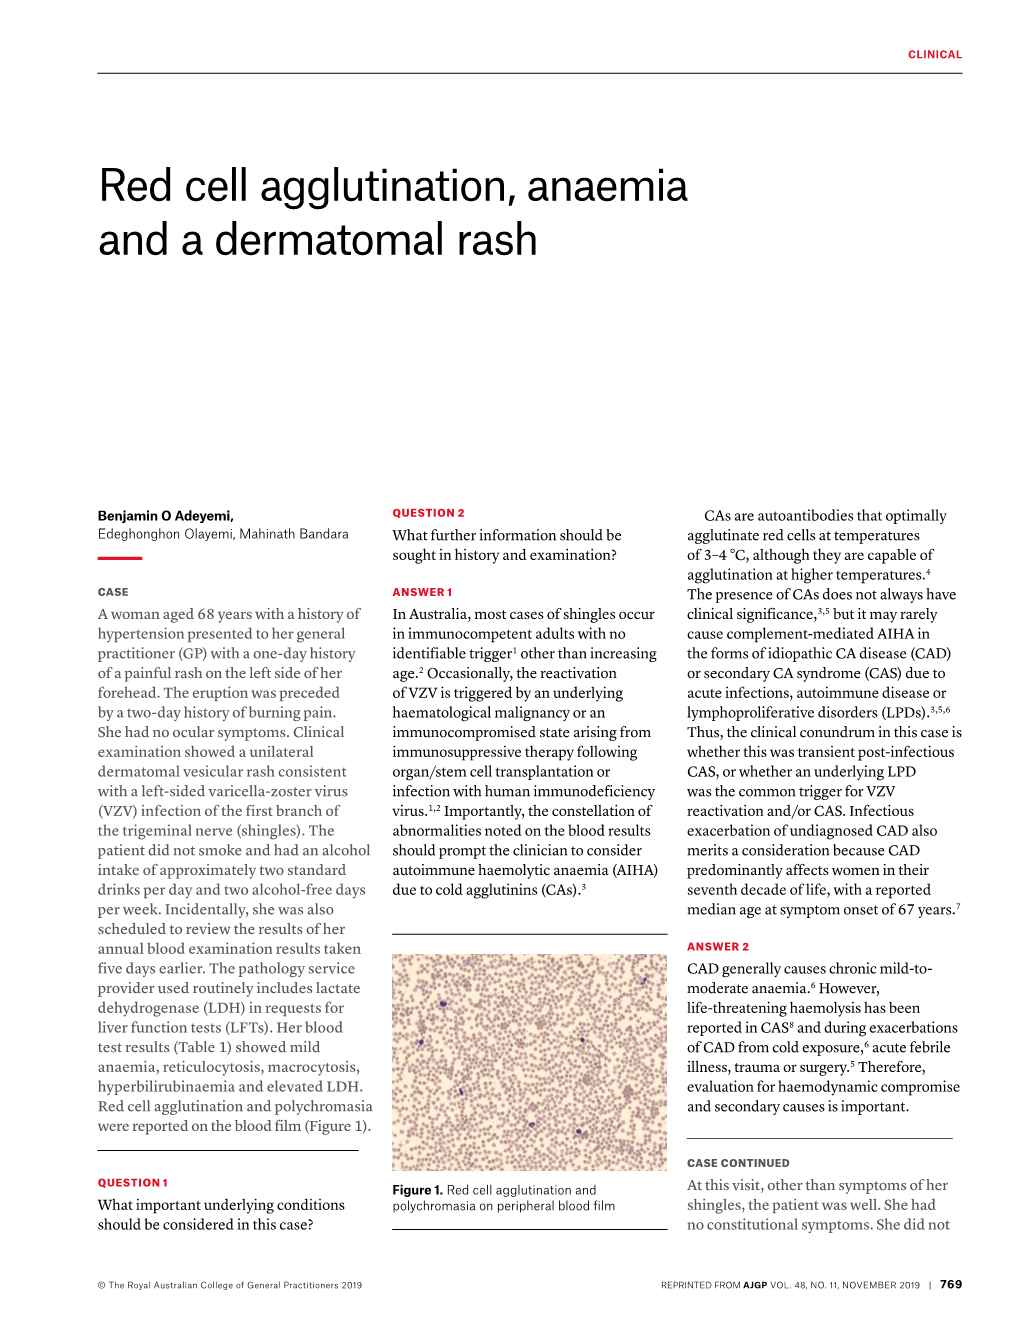 Red Cell Agglutination, Anaemia and a Dermatomal Rash